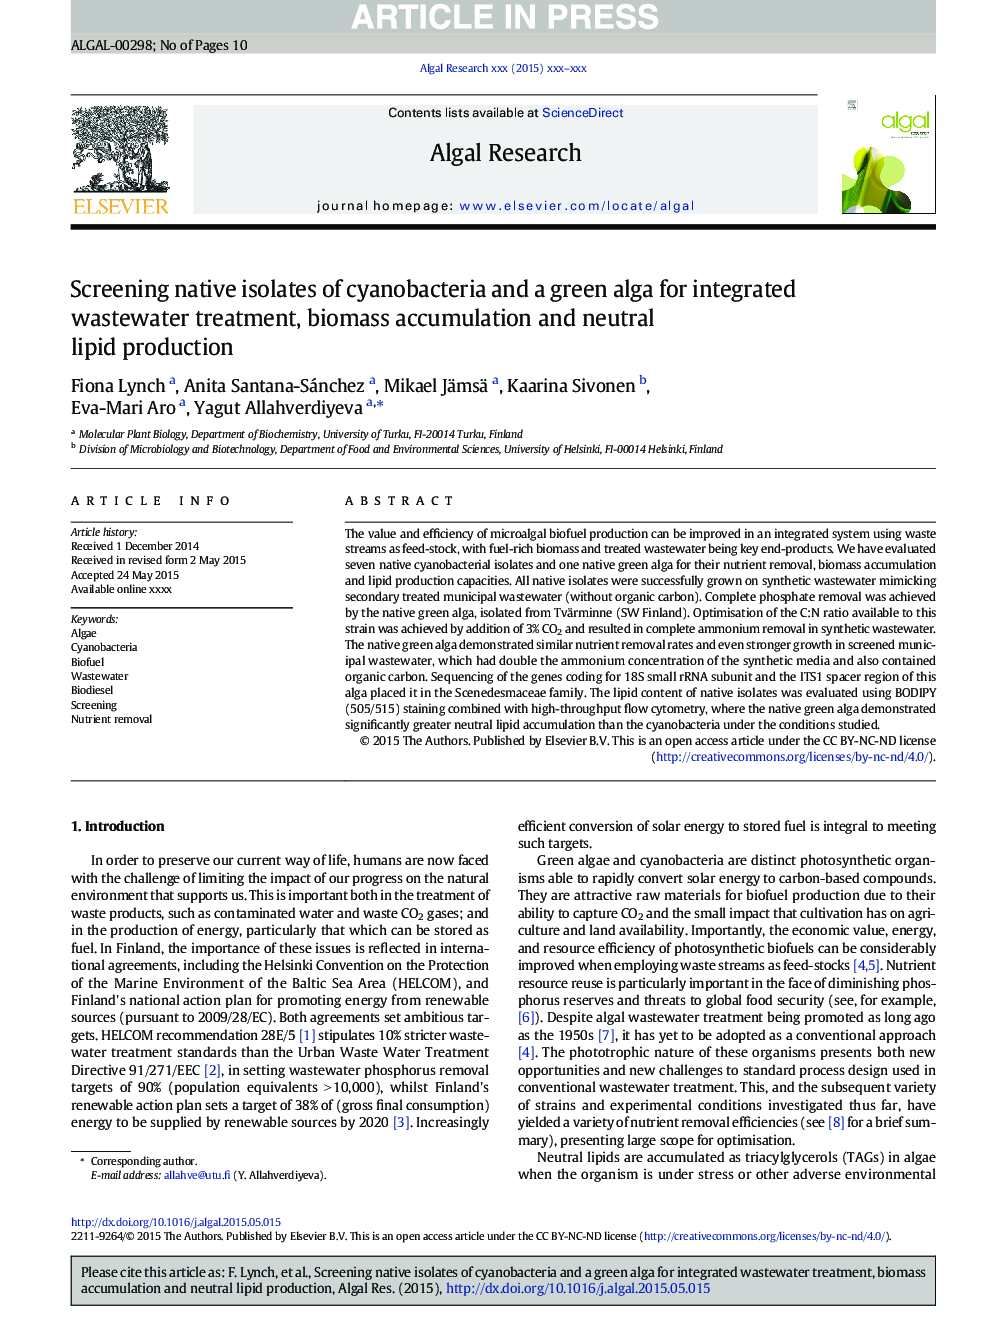 Screening native isolates of cyanobacteria and a green alga for integrated wastewater treatment, biomass accumulation and neutral lipid production